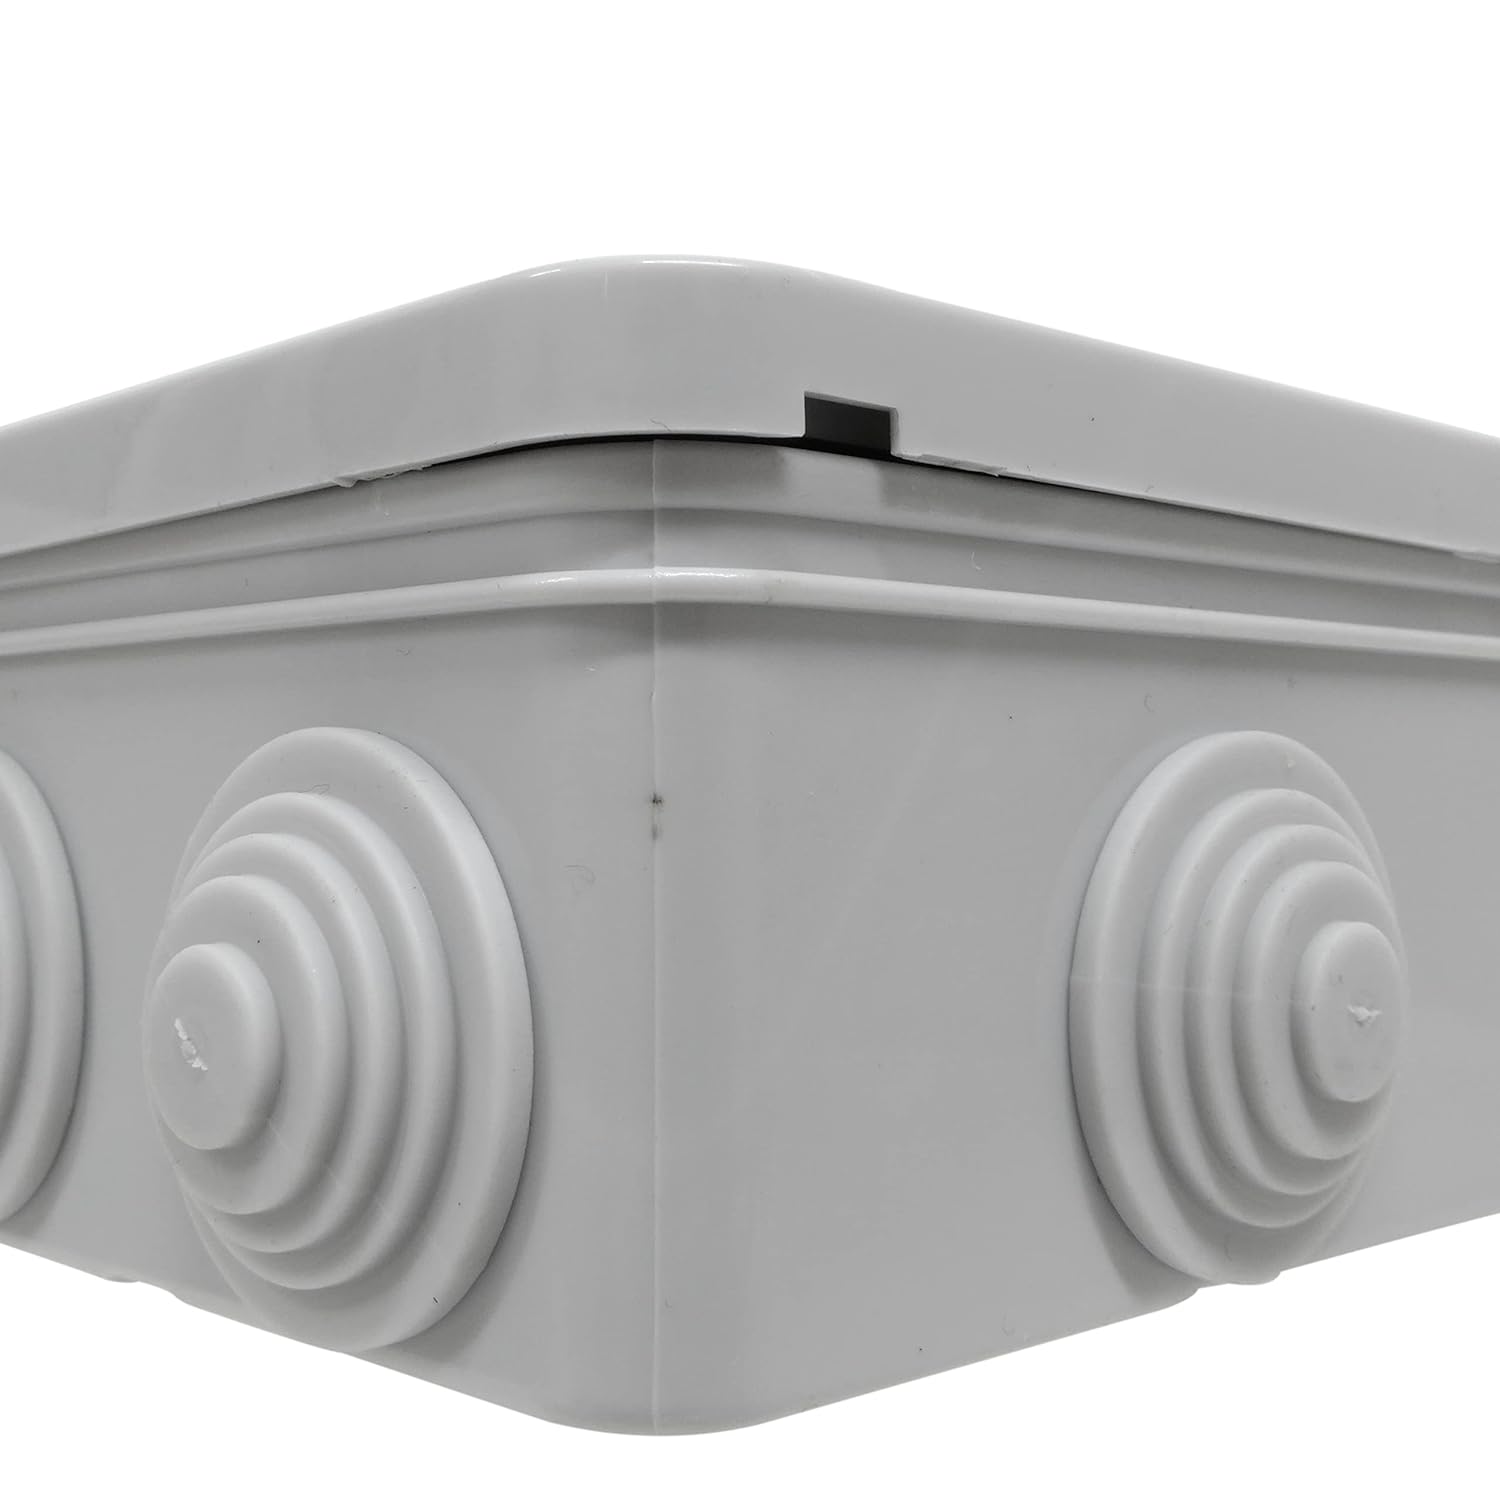 ESR SO80 80mm x 80mm x 40mm IP44 Electrical Junction Box with Grommets Outdoor Exterior Wiring Cable Connection CCTV